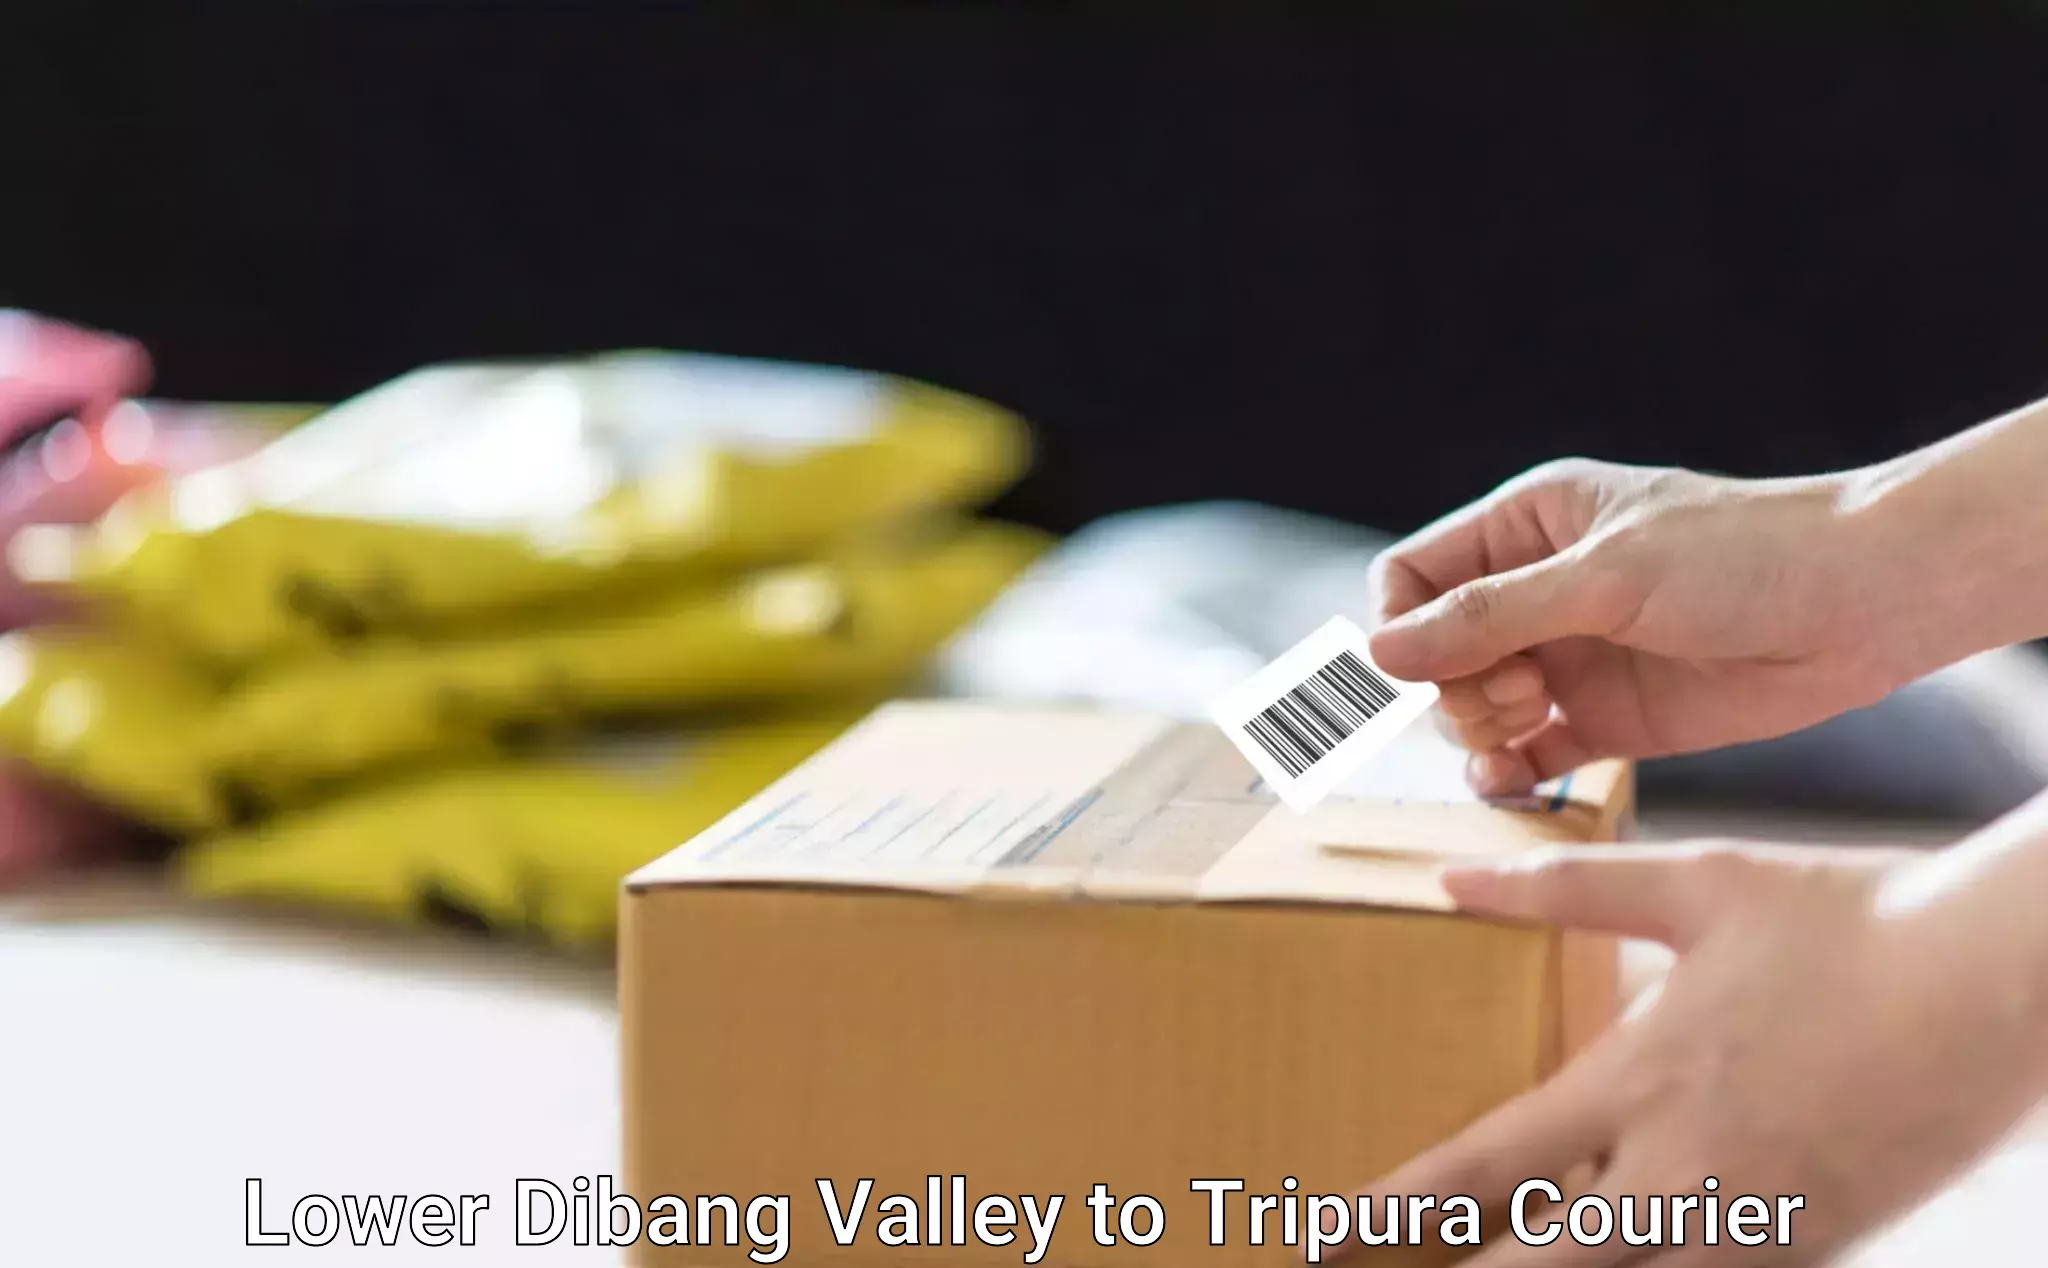 Express delivery capabilities Lower Dibang Valley to Agartala